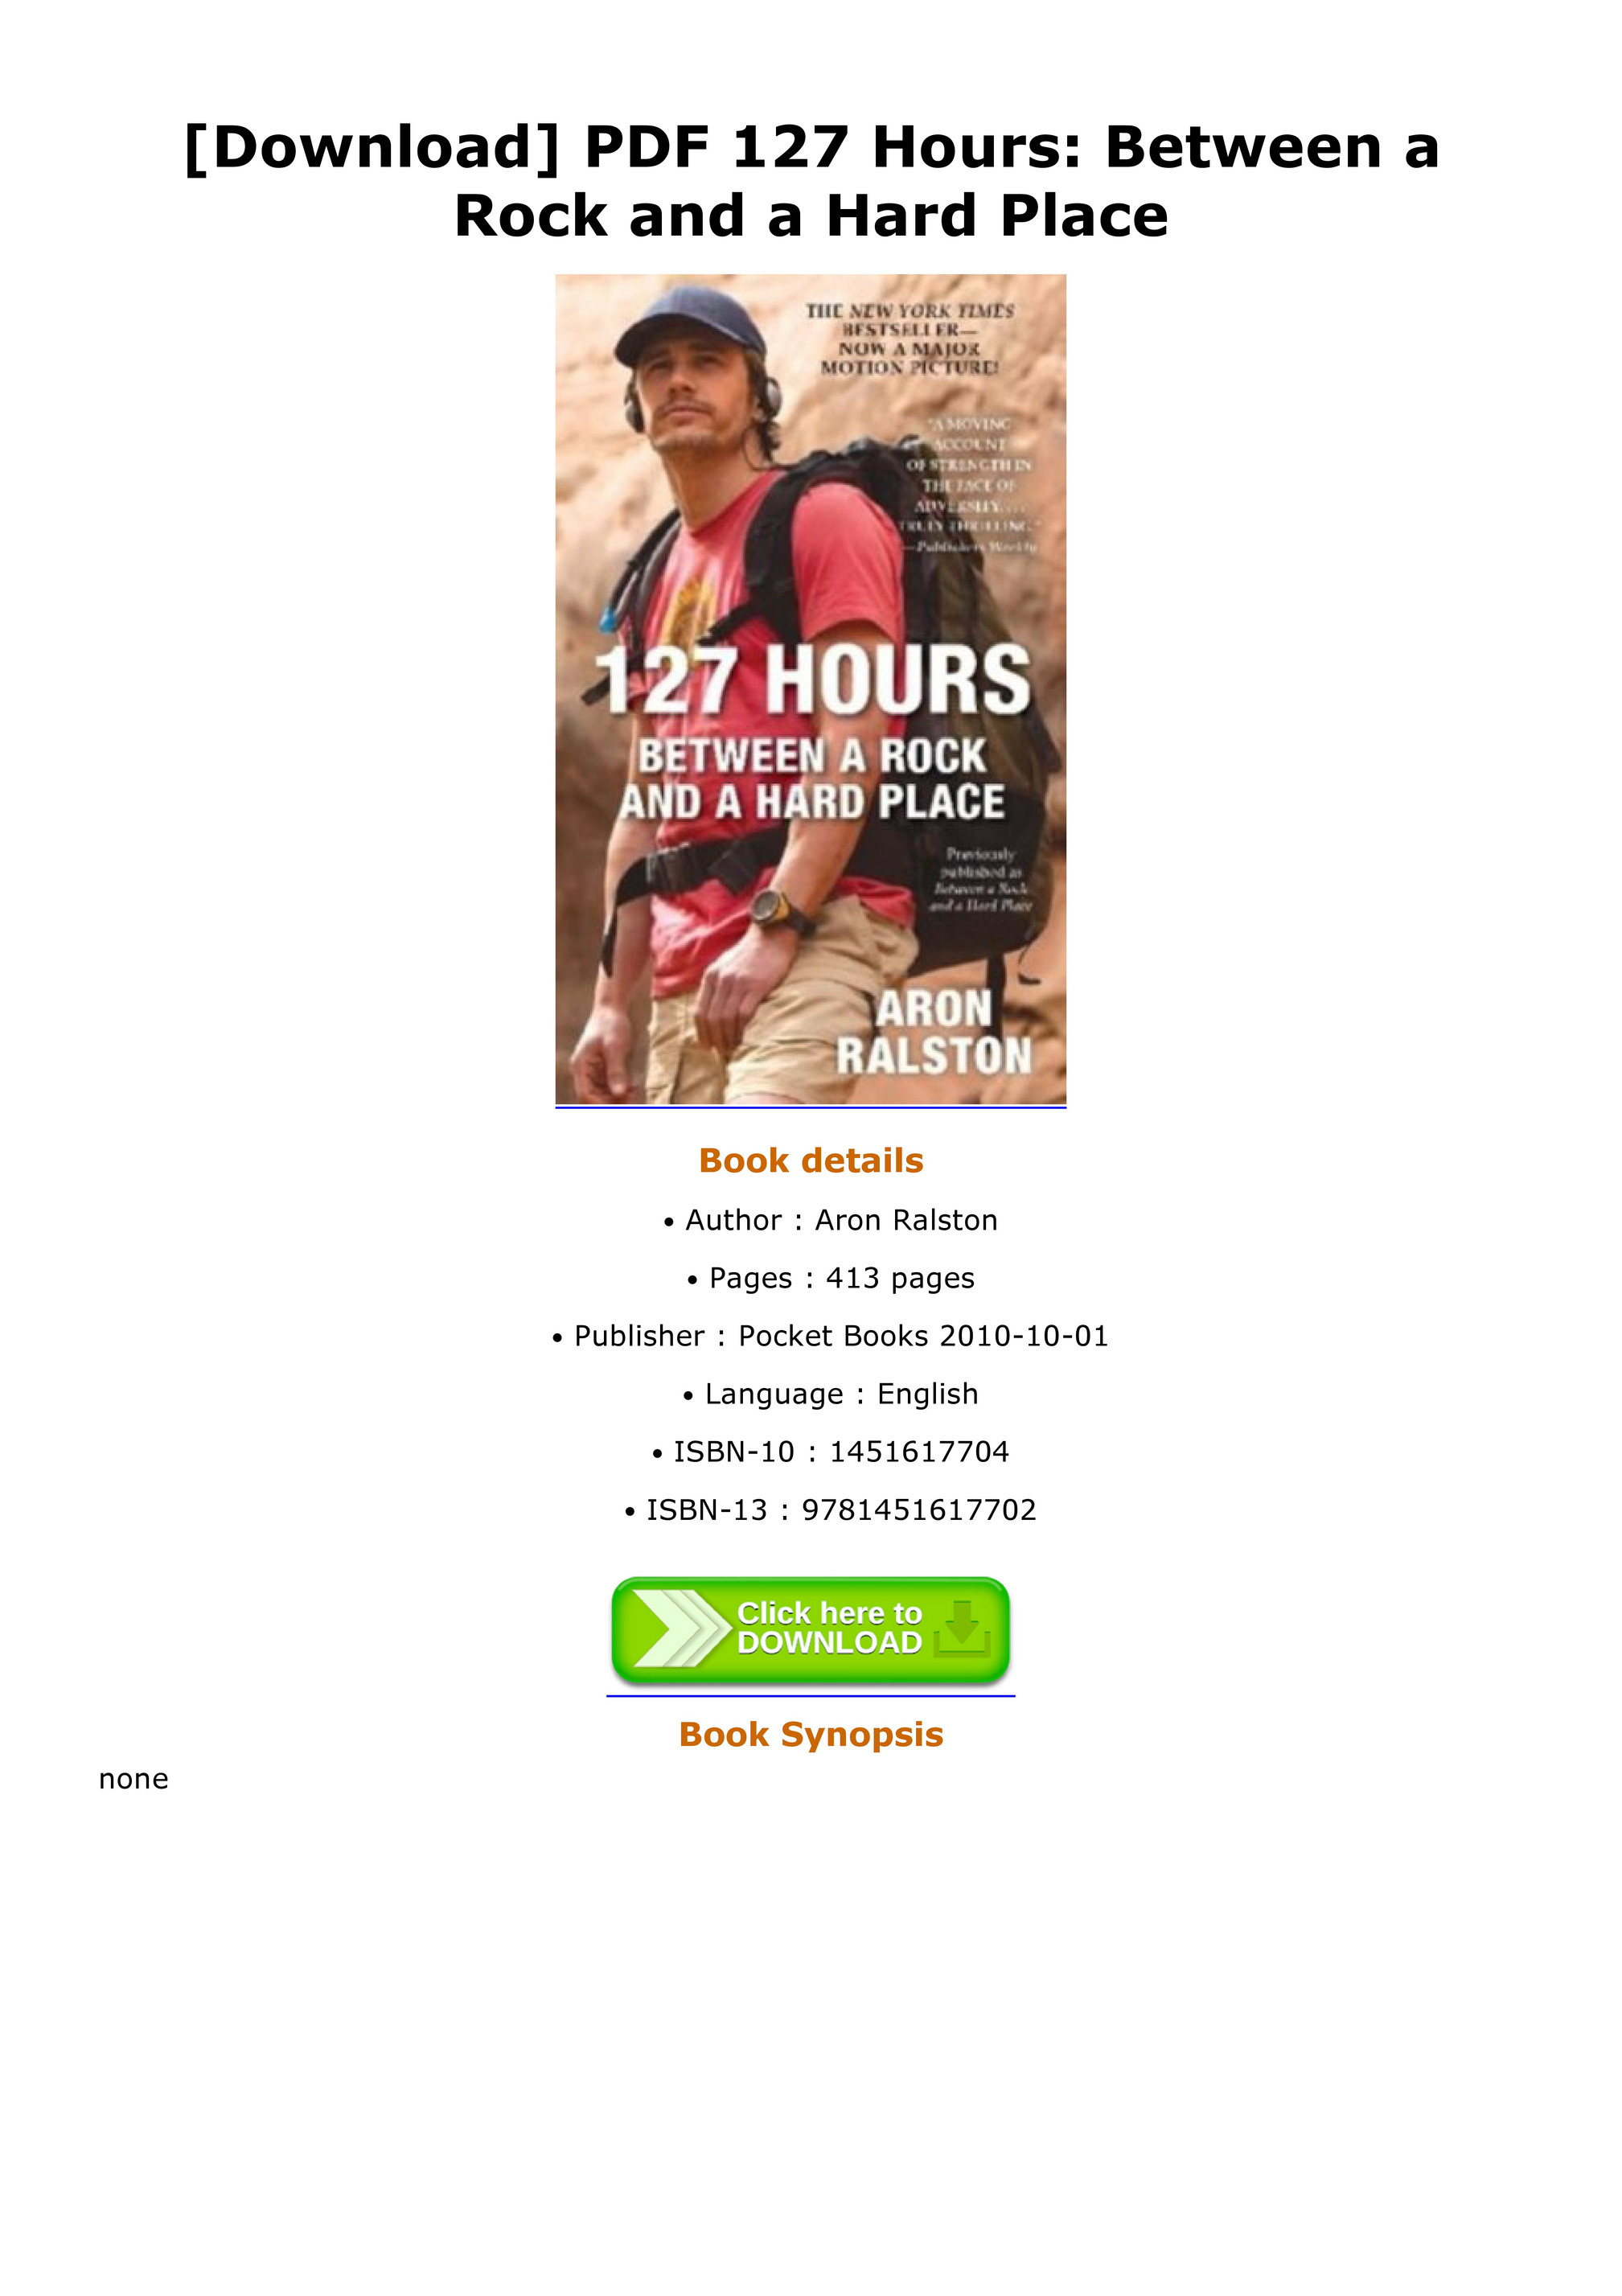 Between a rock and a hard place aron ralston pdf files btc crypto wallet